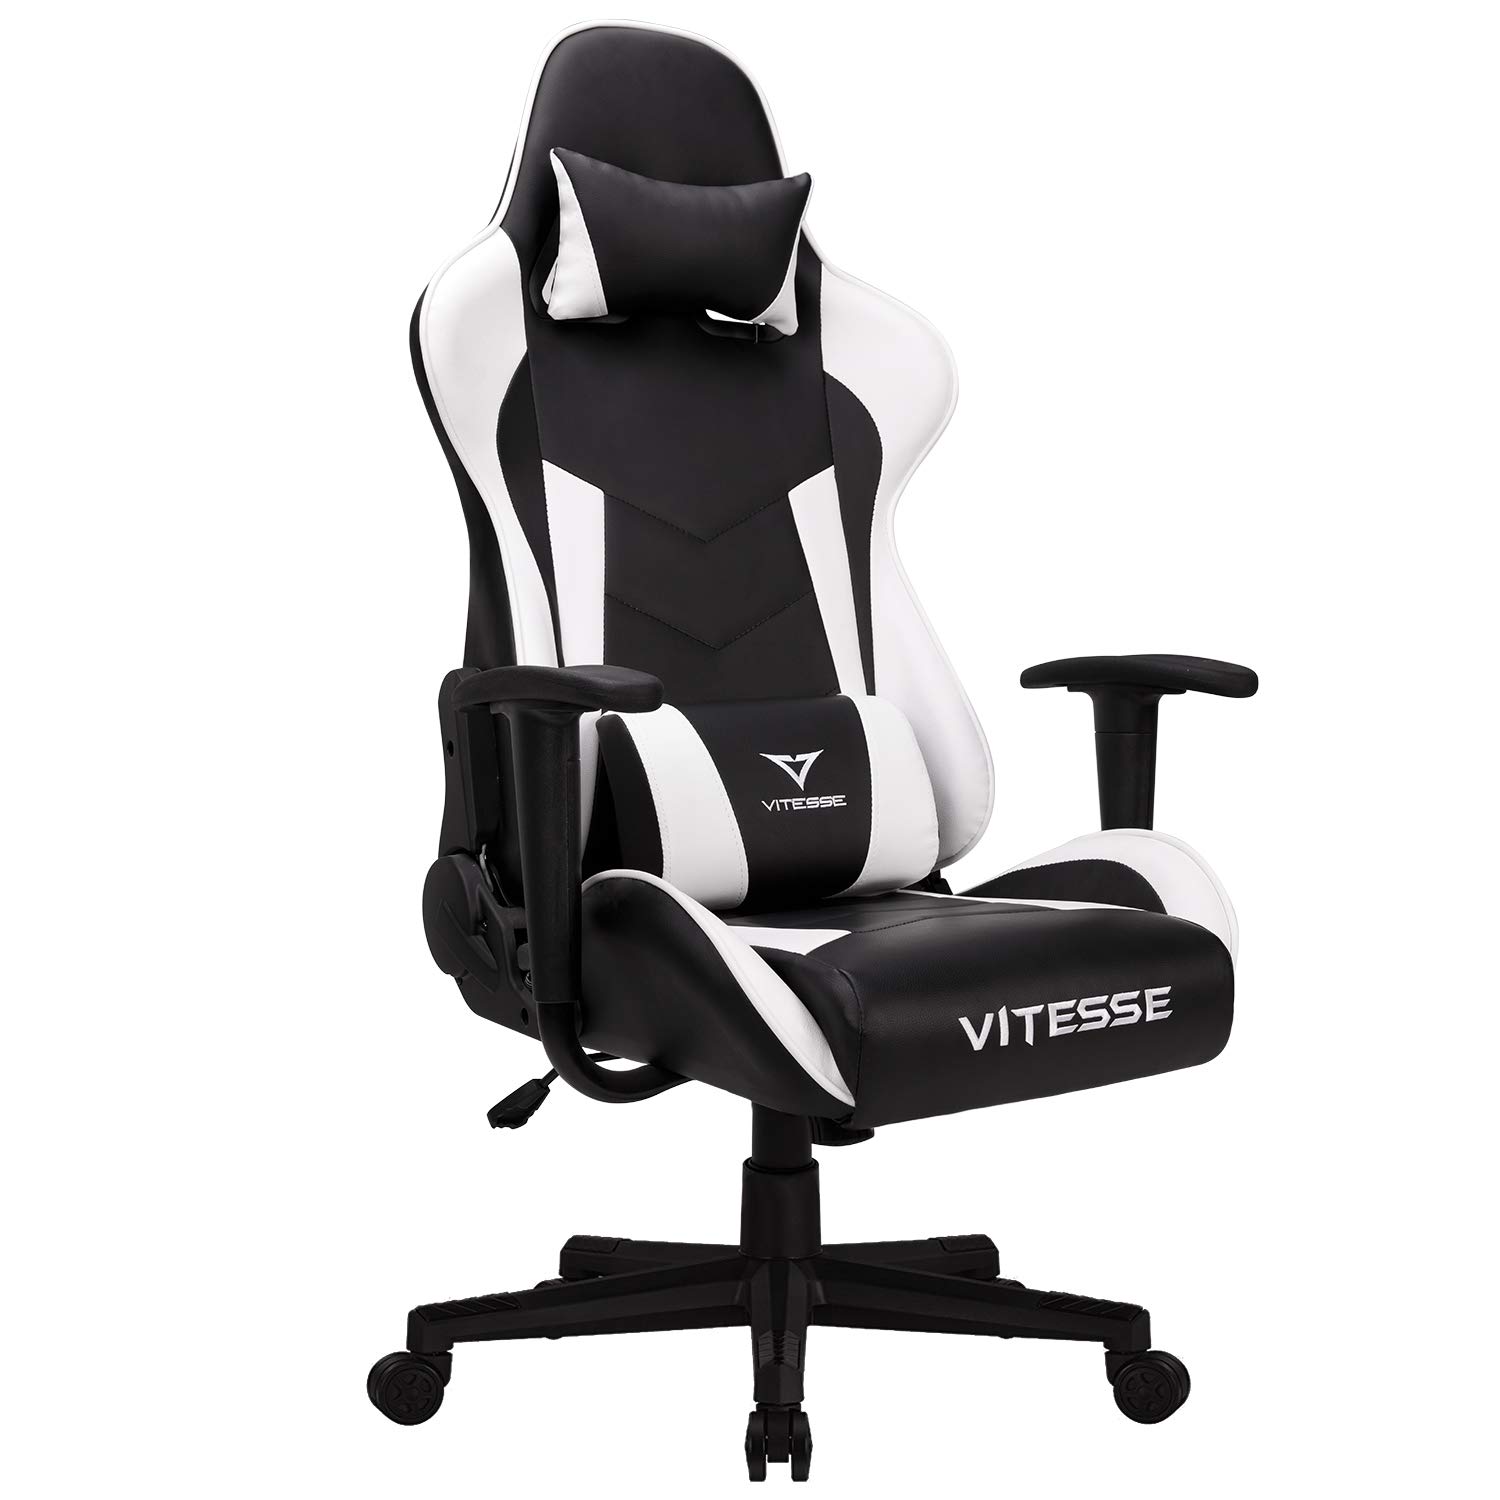 Top 10 Best Cheap Gaming Chairs Under 100$ in 2022 - For Gamers